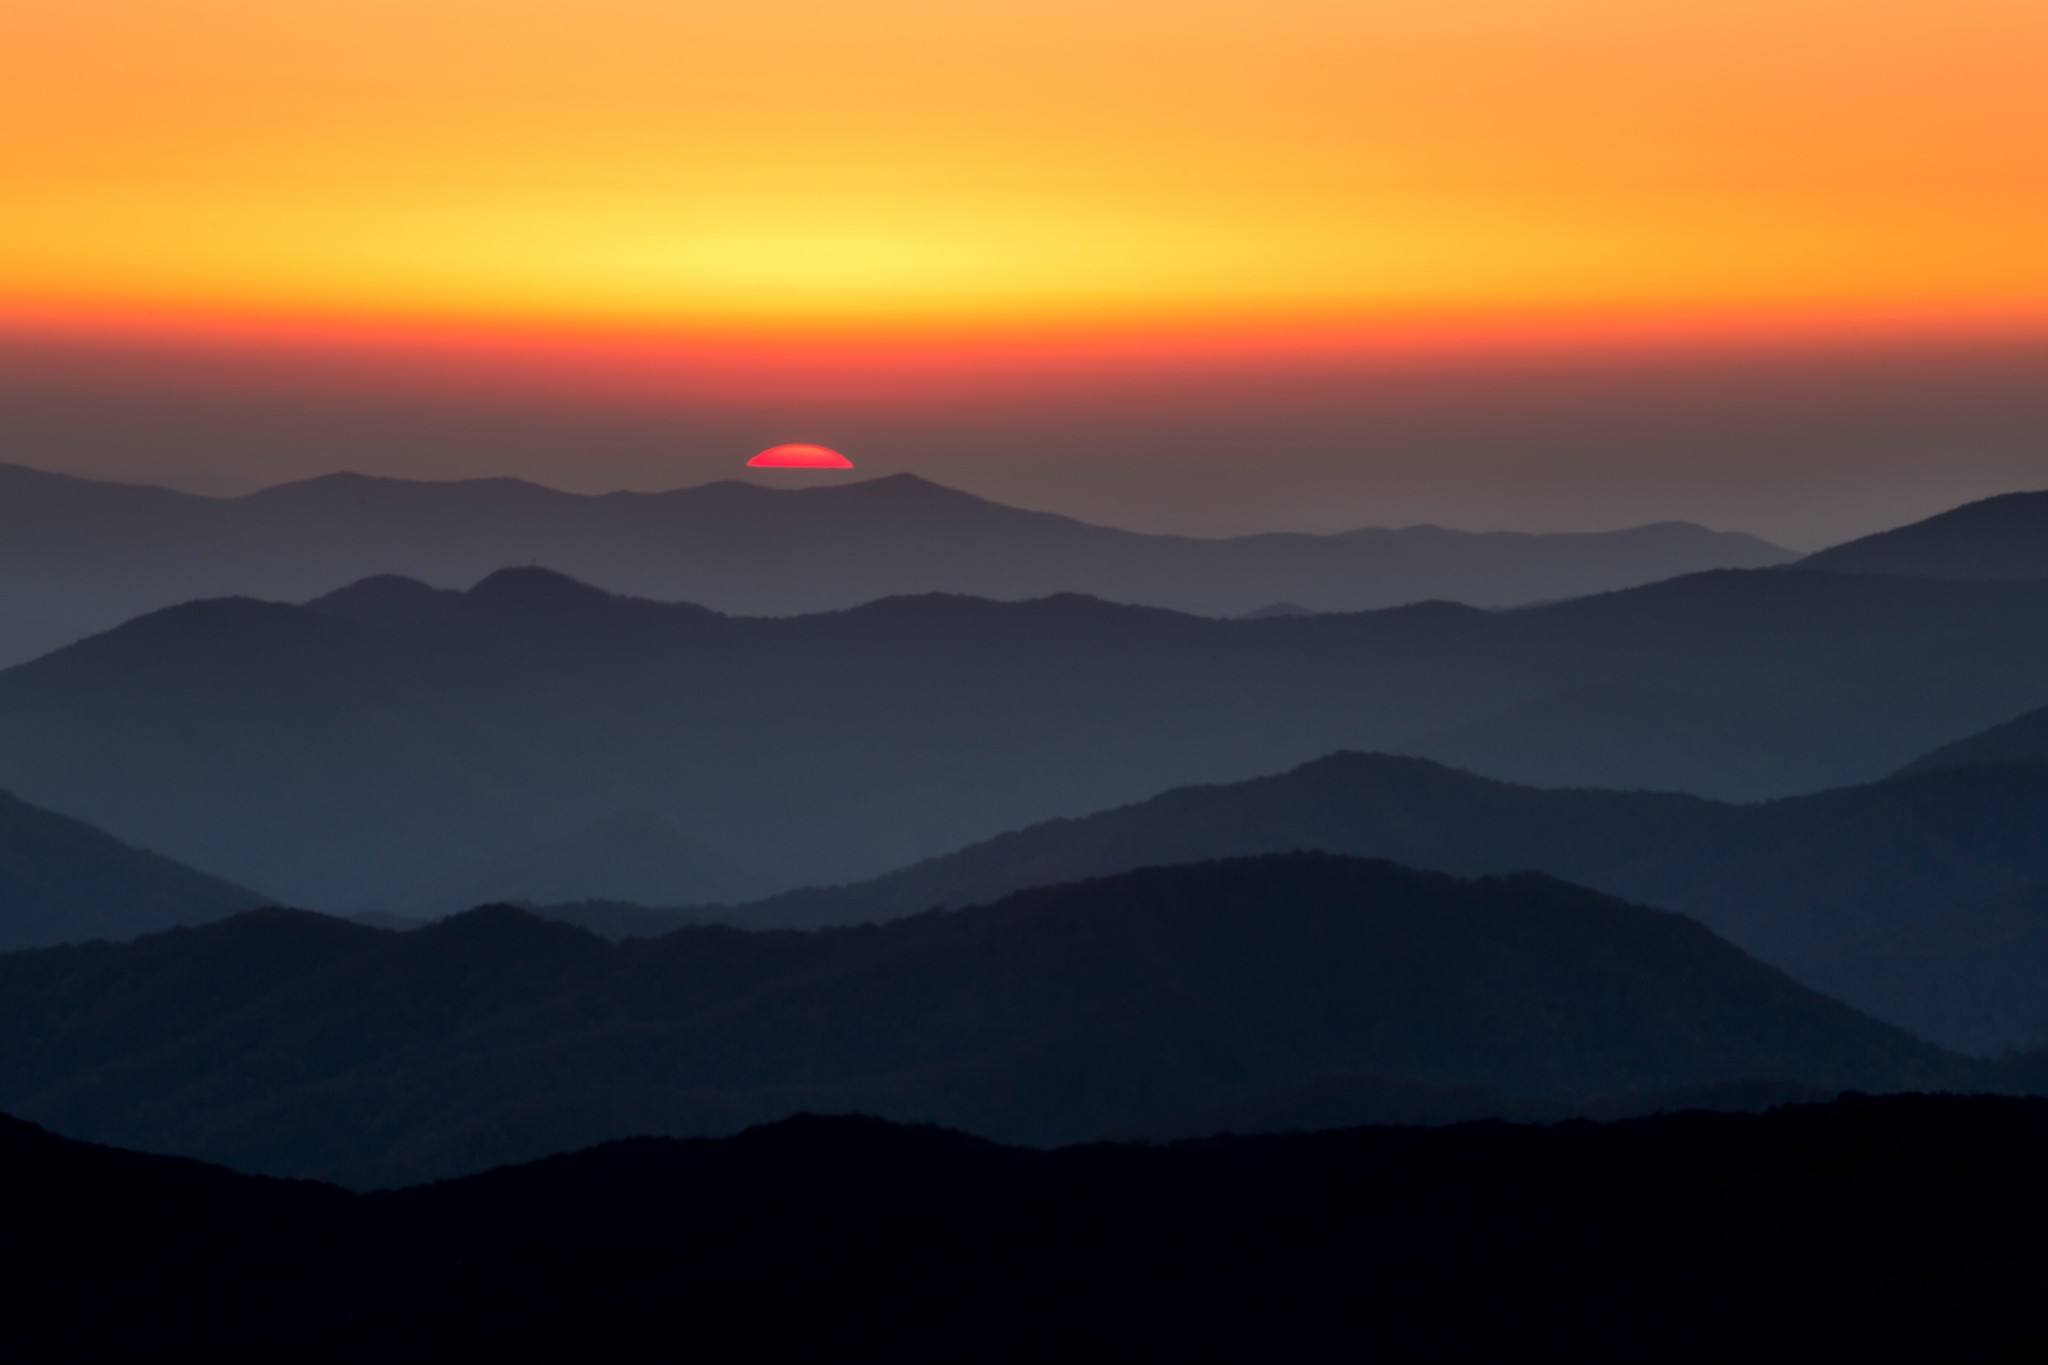 General 2048x1365 landscape Sun Smoky Mountains Tennessee national park mountains sunset orange sky skyscape silhouette